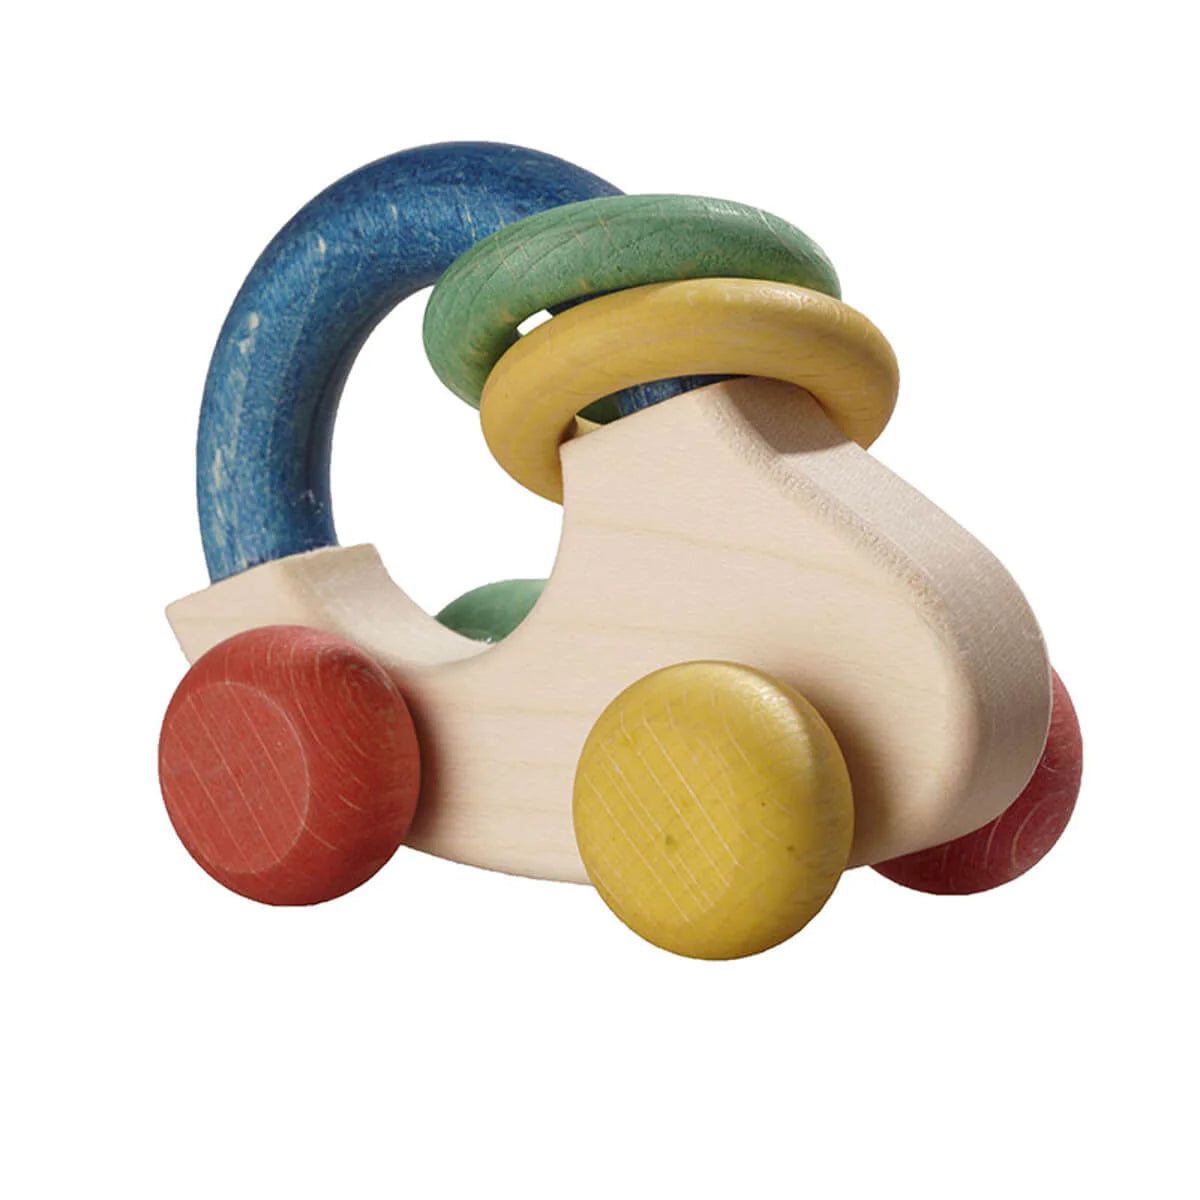 Walter Grasping Toy - Rattle Grip-n-Car (plant-based dyes)